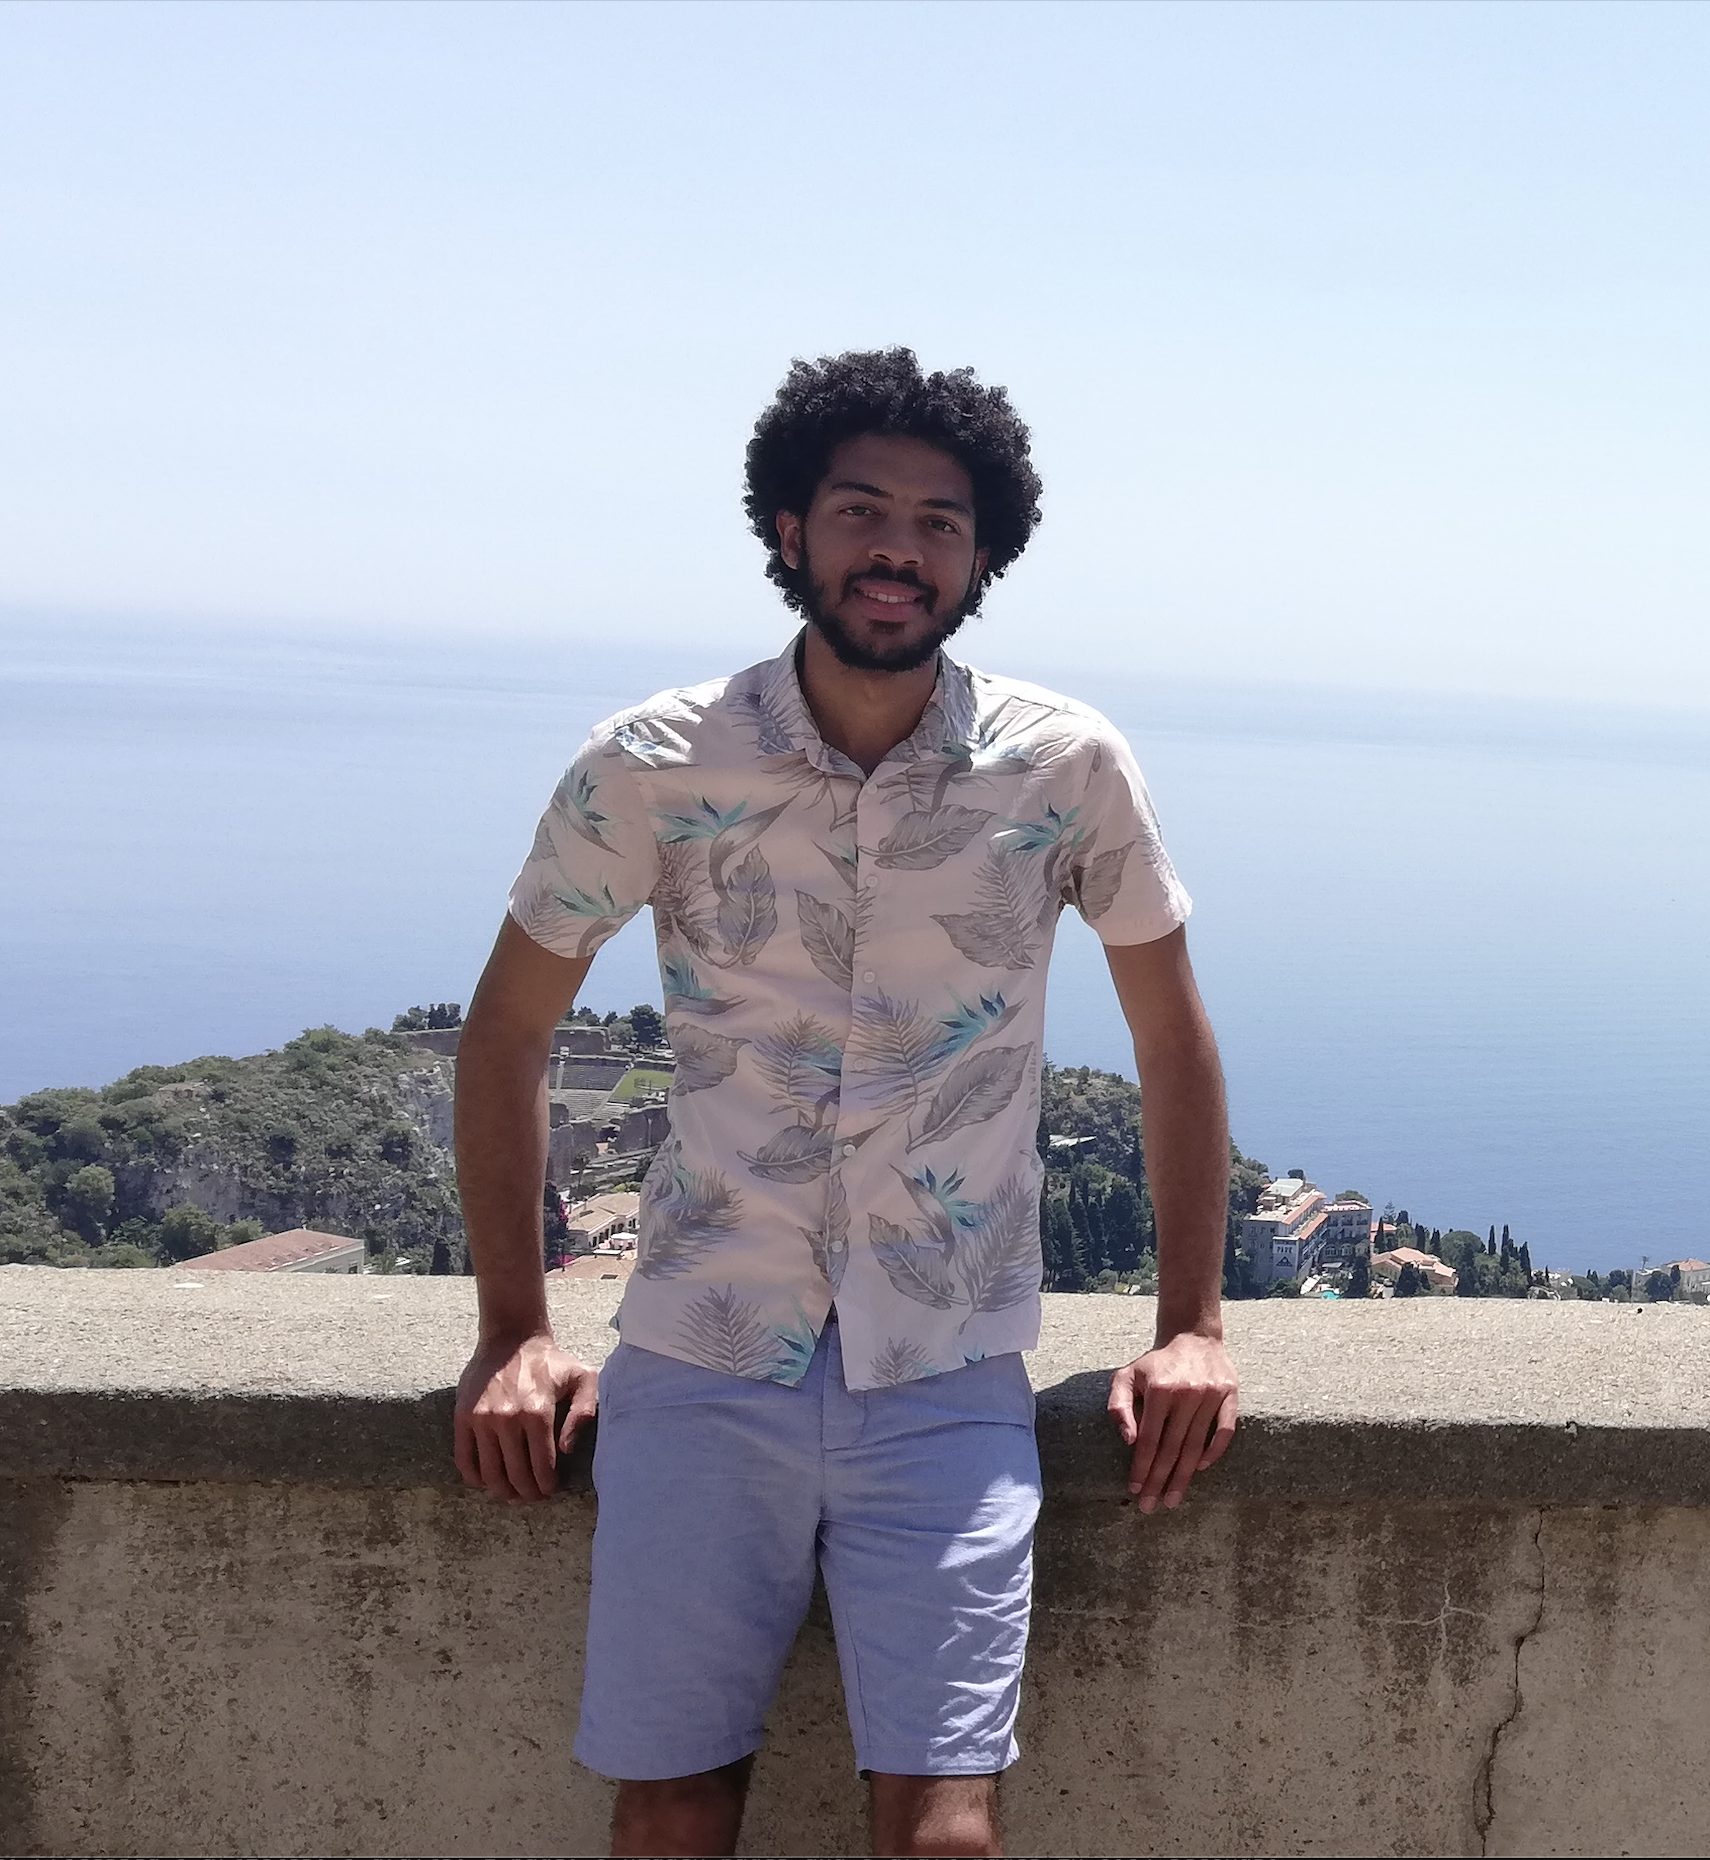 Profile Image (Me in Sicily, Italy)